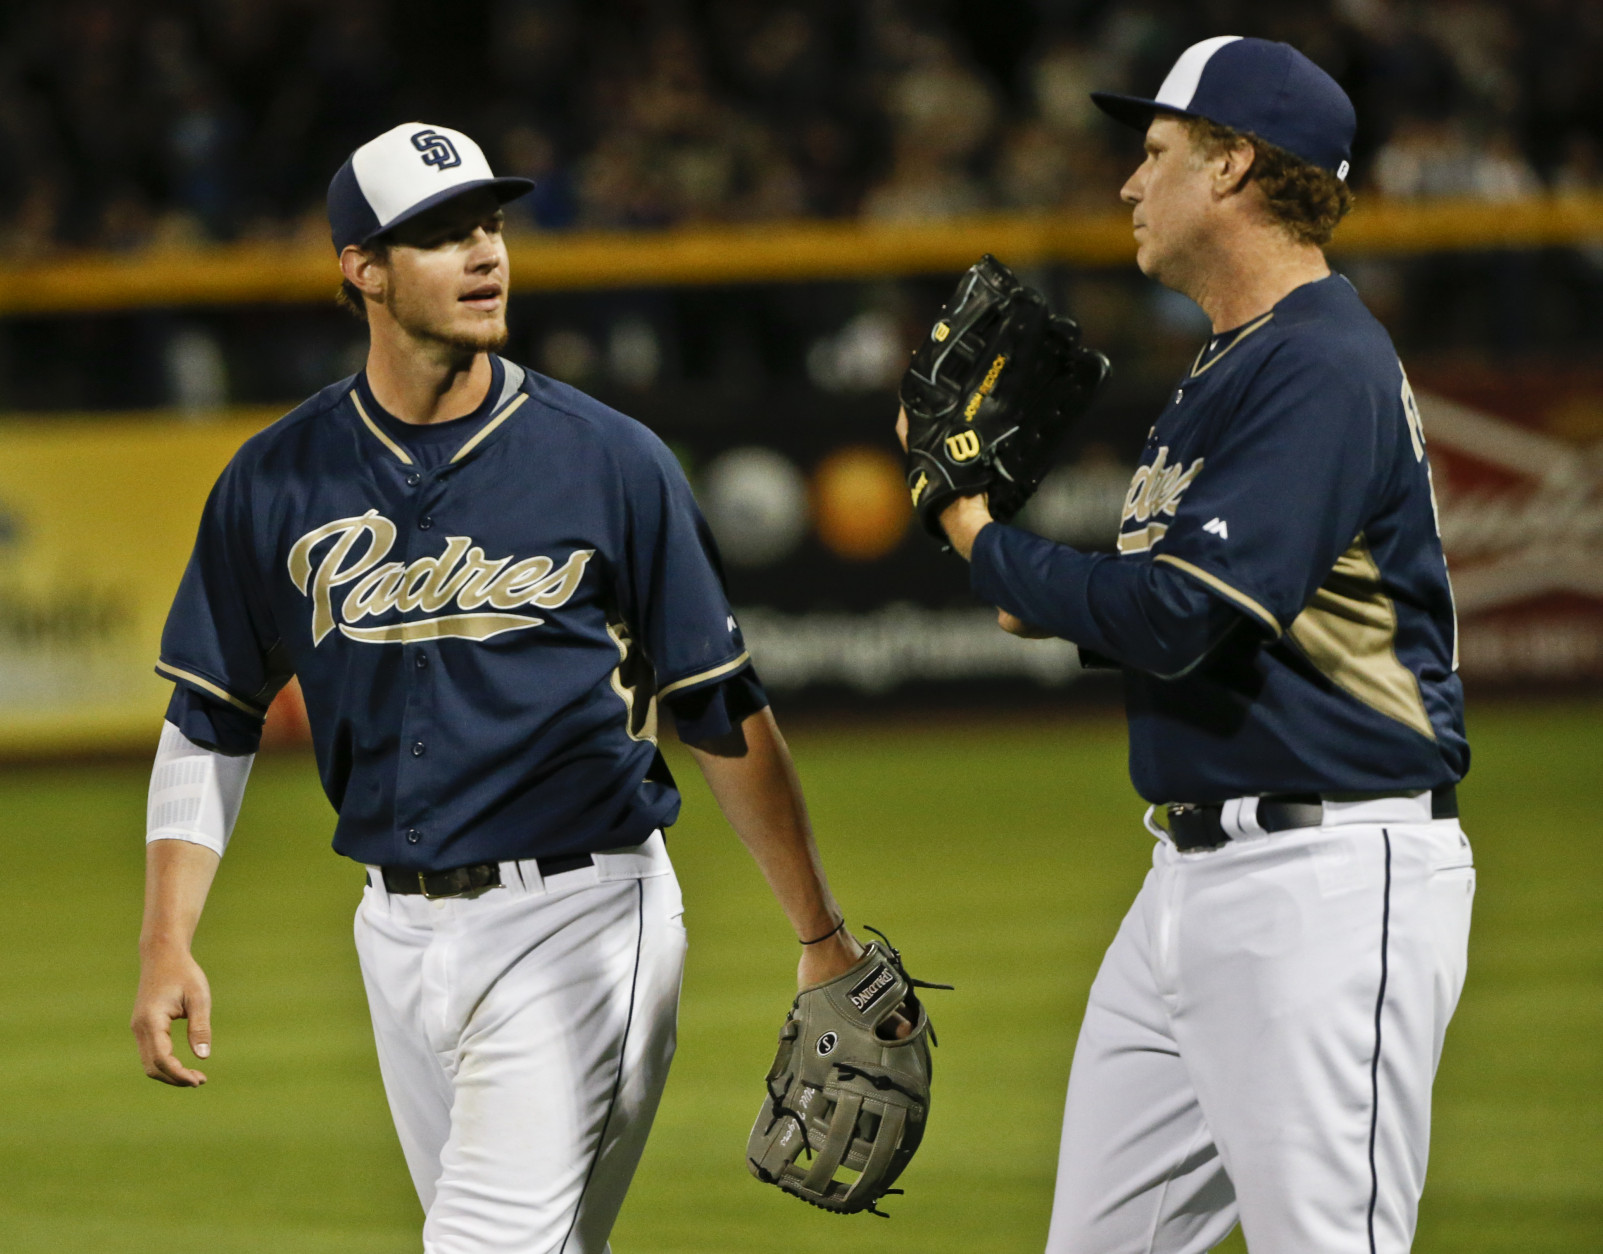 Actor Will Ferrell talks with San Diego Padres center fielder Wil Myers as the pair come off the field following an inning in which Ferrell played right field for the Padres in a spring training baseball game against the Los Angeles Dodgers Thursday, March 12, 2015, in Peoria, Ariz.  (AP Photo/Lenny Ignelzi)